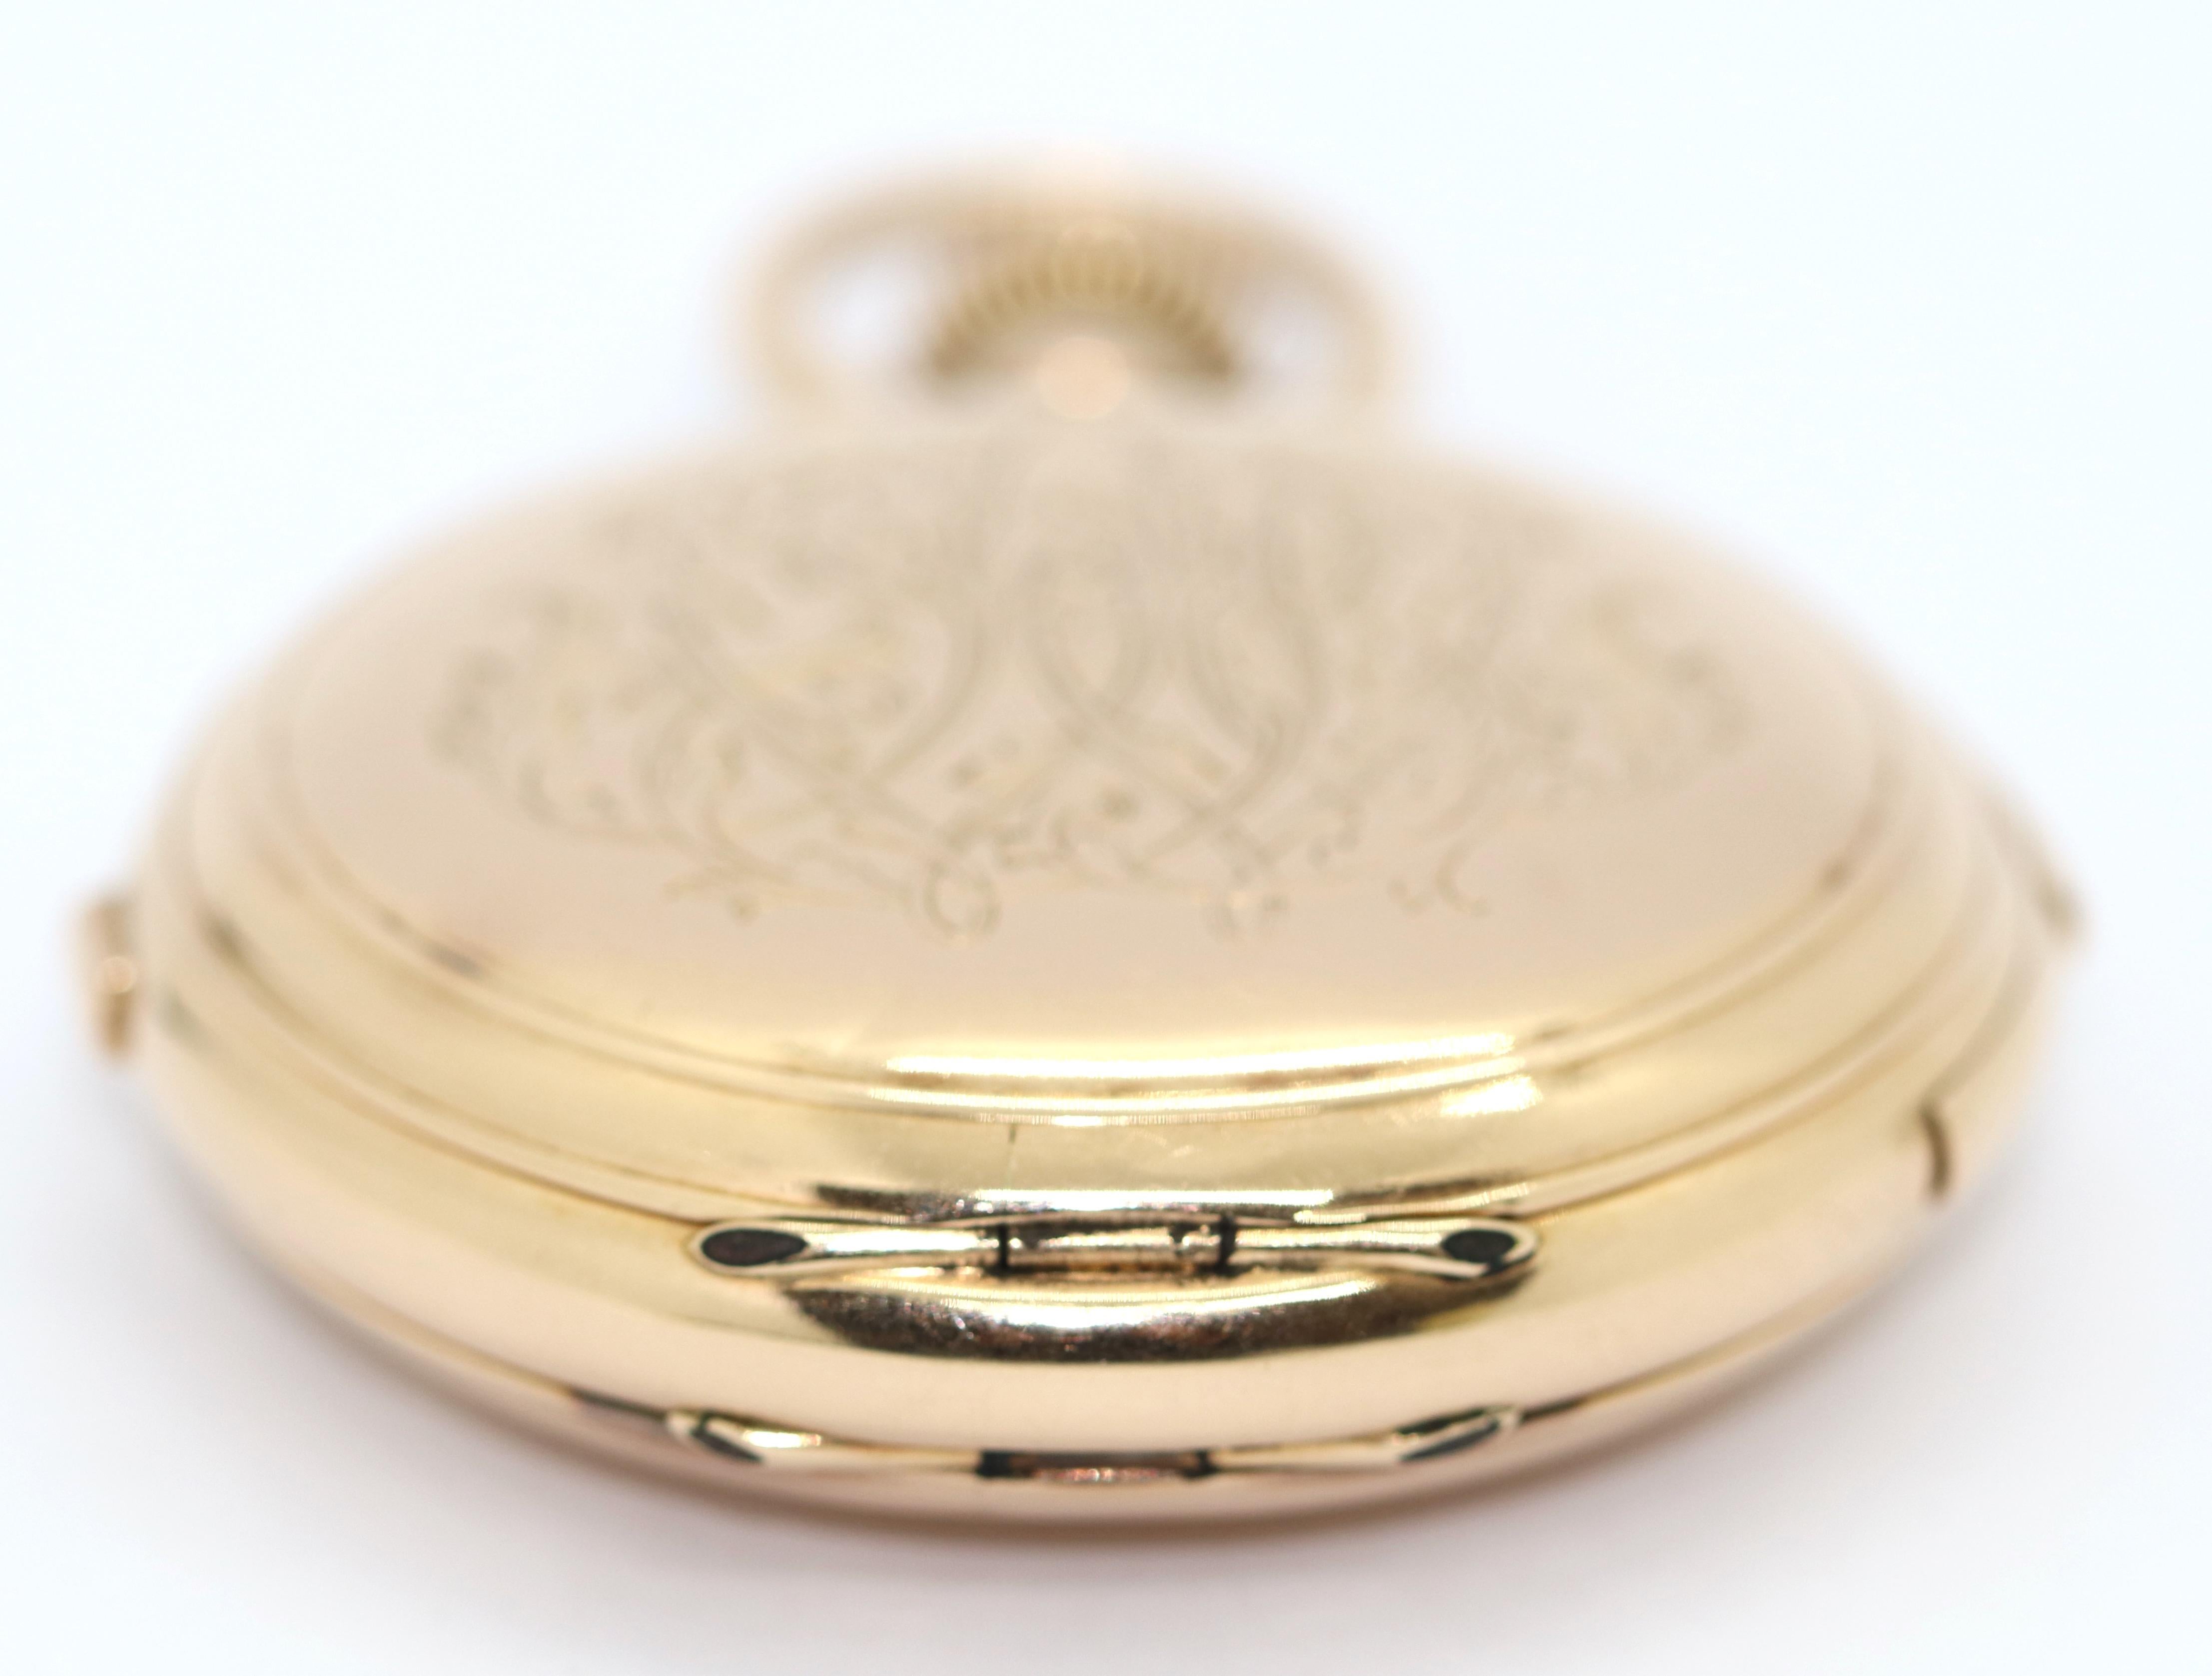 14K Gold Pocket Hunter Watch by American Watch Co. Waltham, Chronograph Repeater For Sale 6